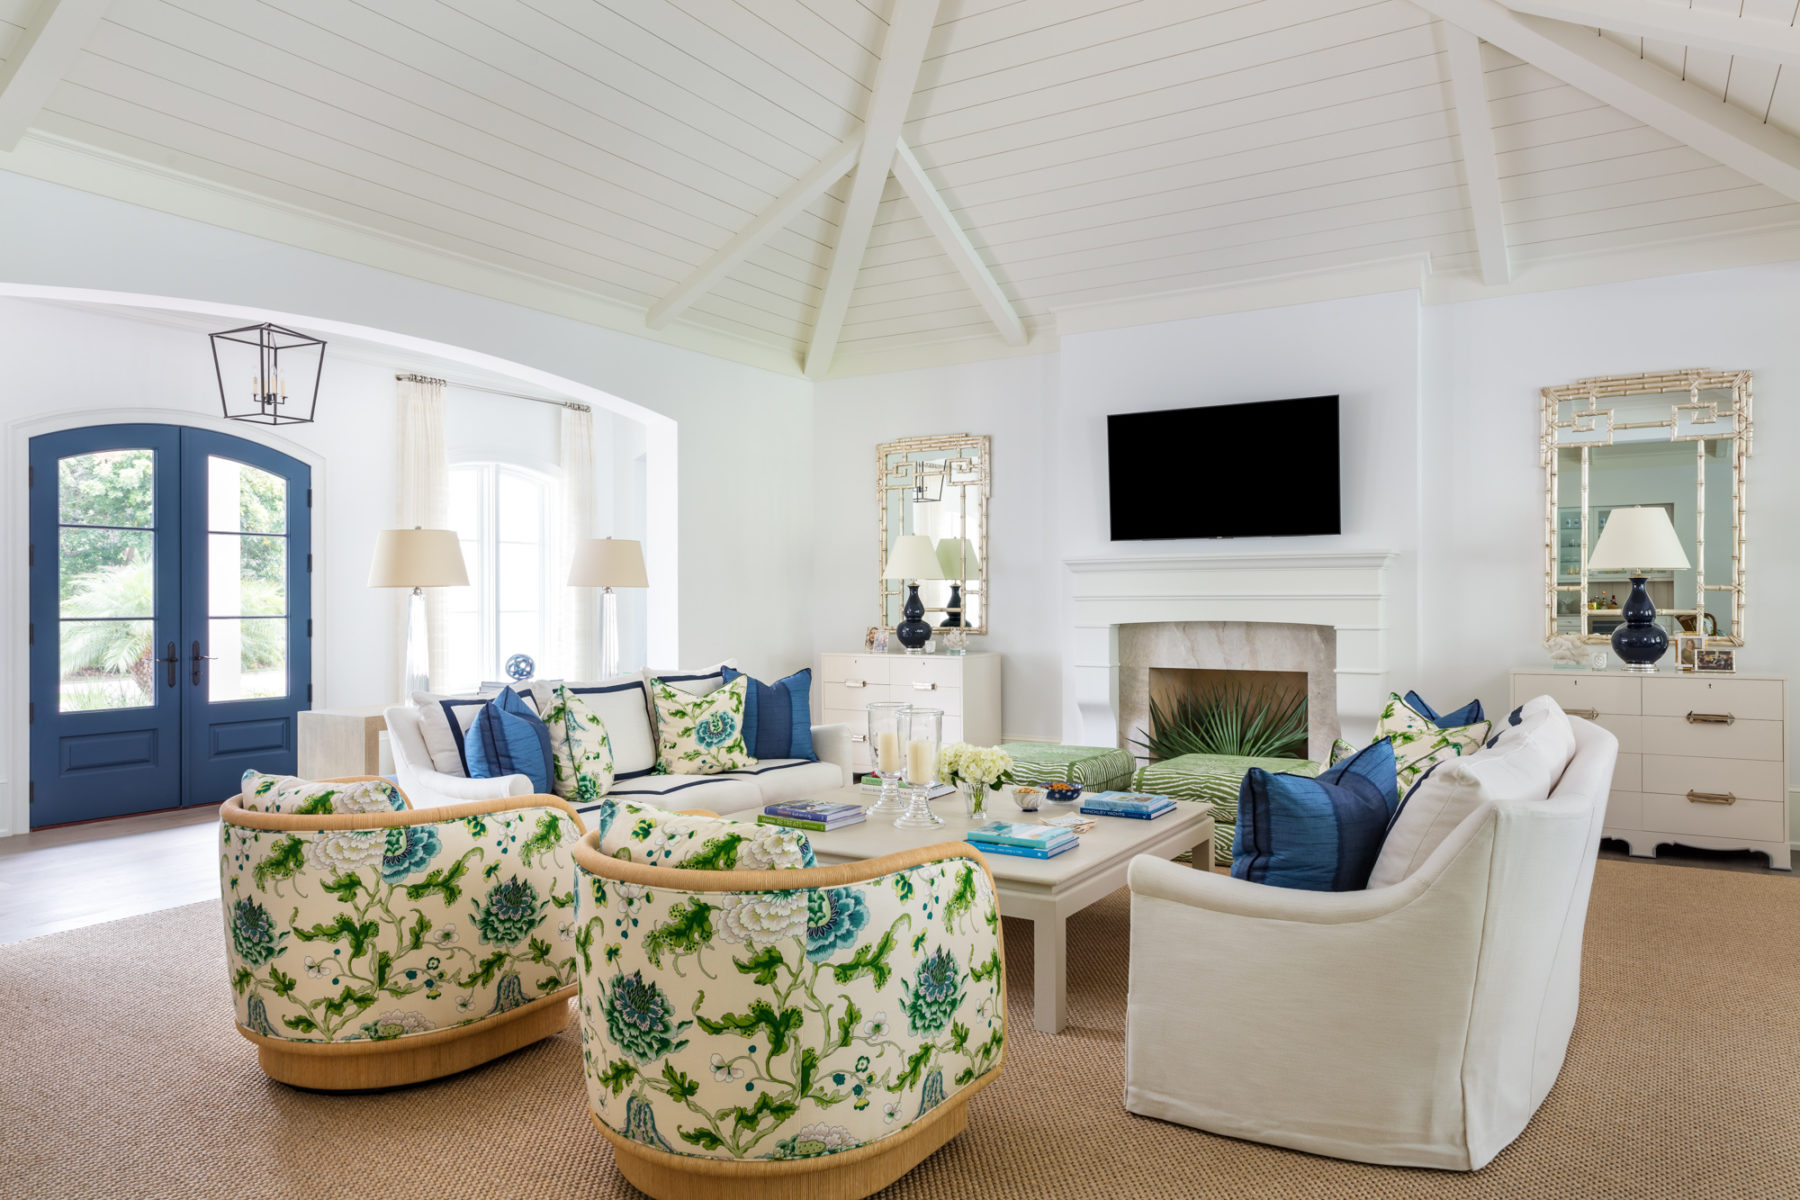 image of John's Island Home living room with white sofas and green floral chairs and pillows